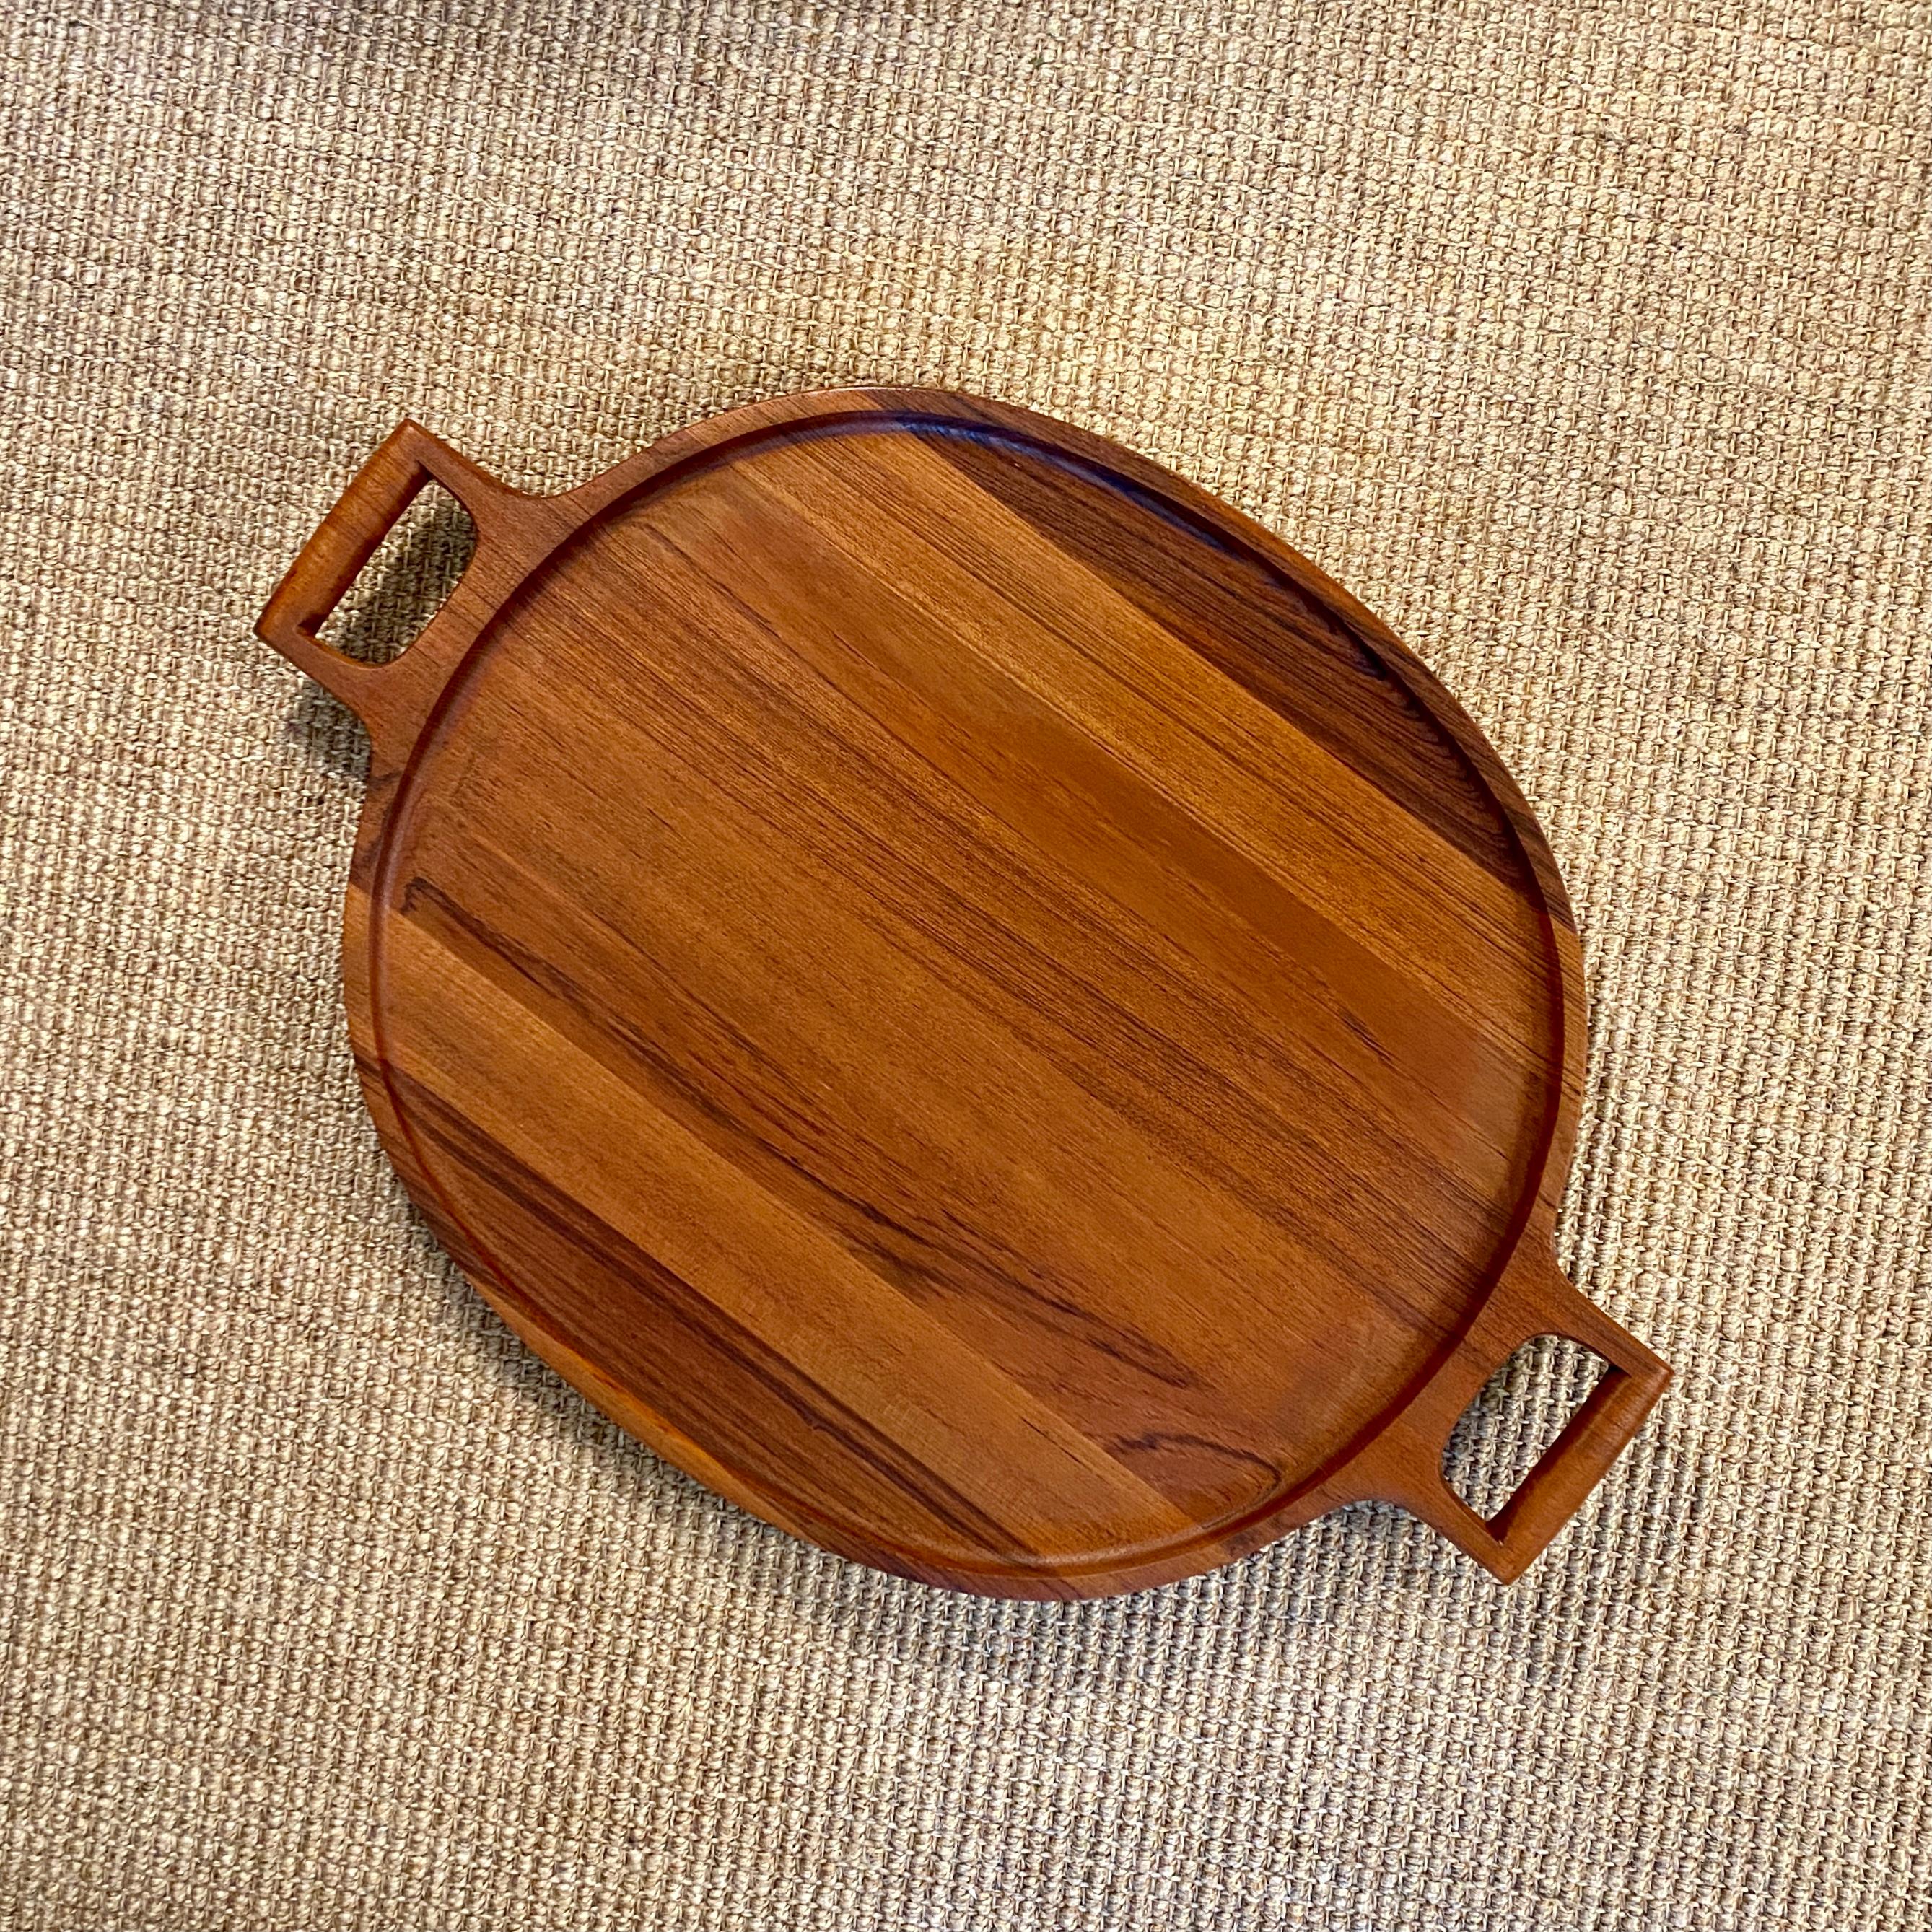 A large handled teak tray designed by Jens Quistgaard for Dansk. On the bottom the tray has the early three duck Dansk logo which dates the tray to the 1960s. The tray measures approximately 26 3/4 inches wide, 19 inches deep and is 1 1/2 inches